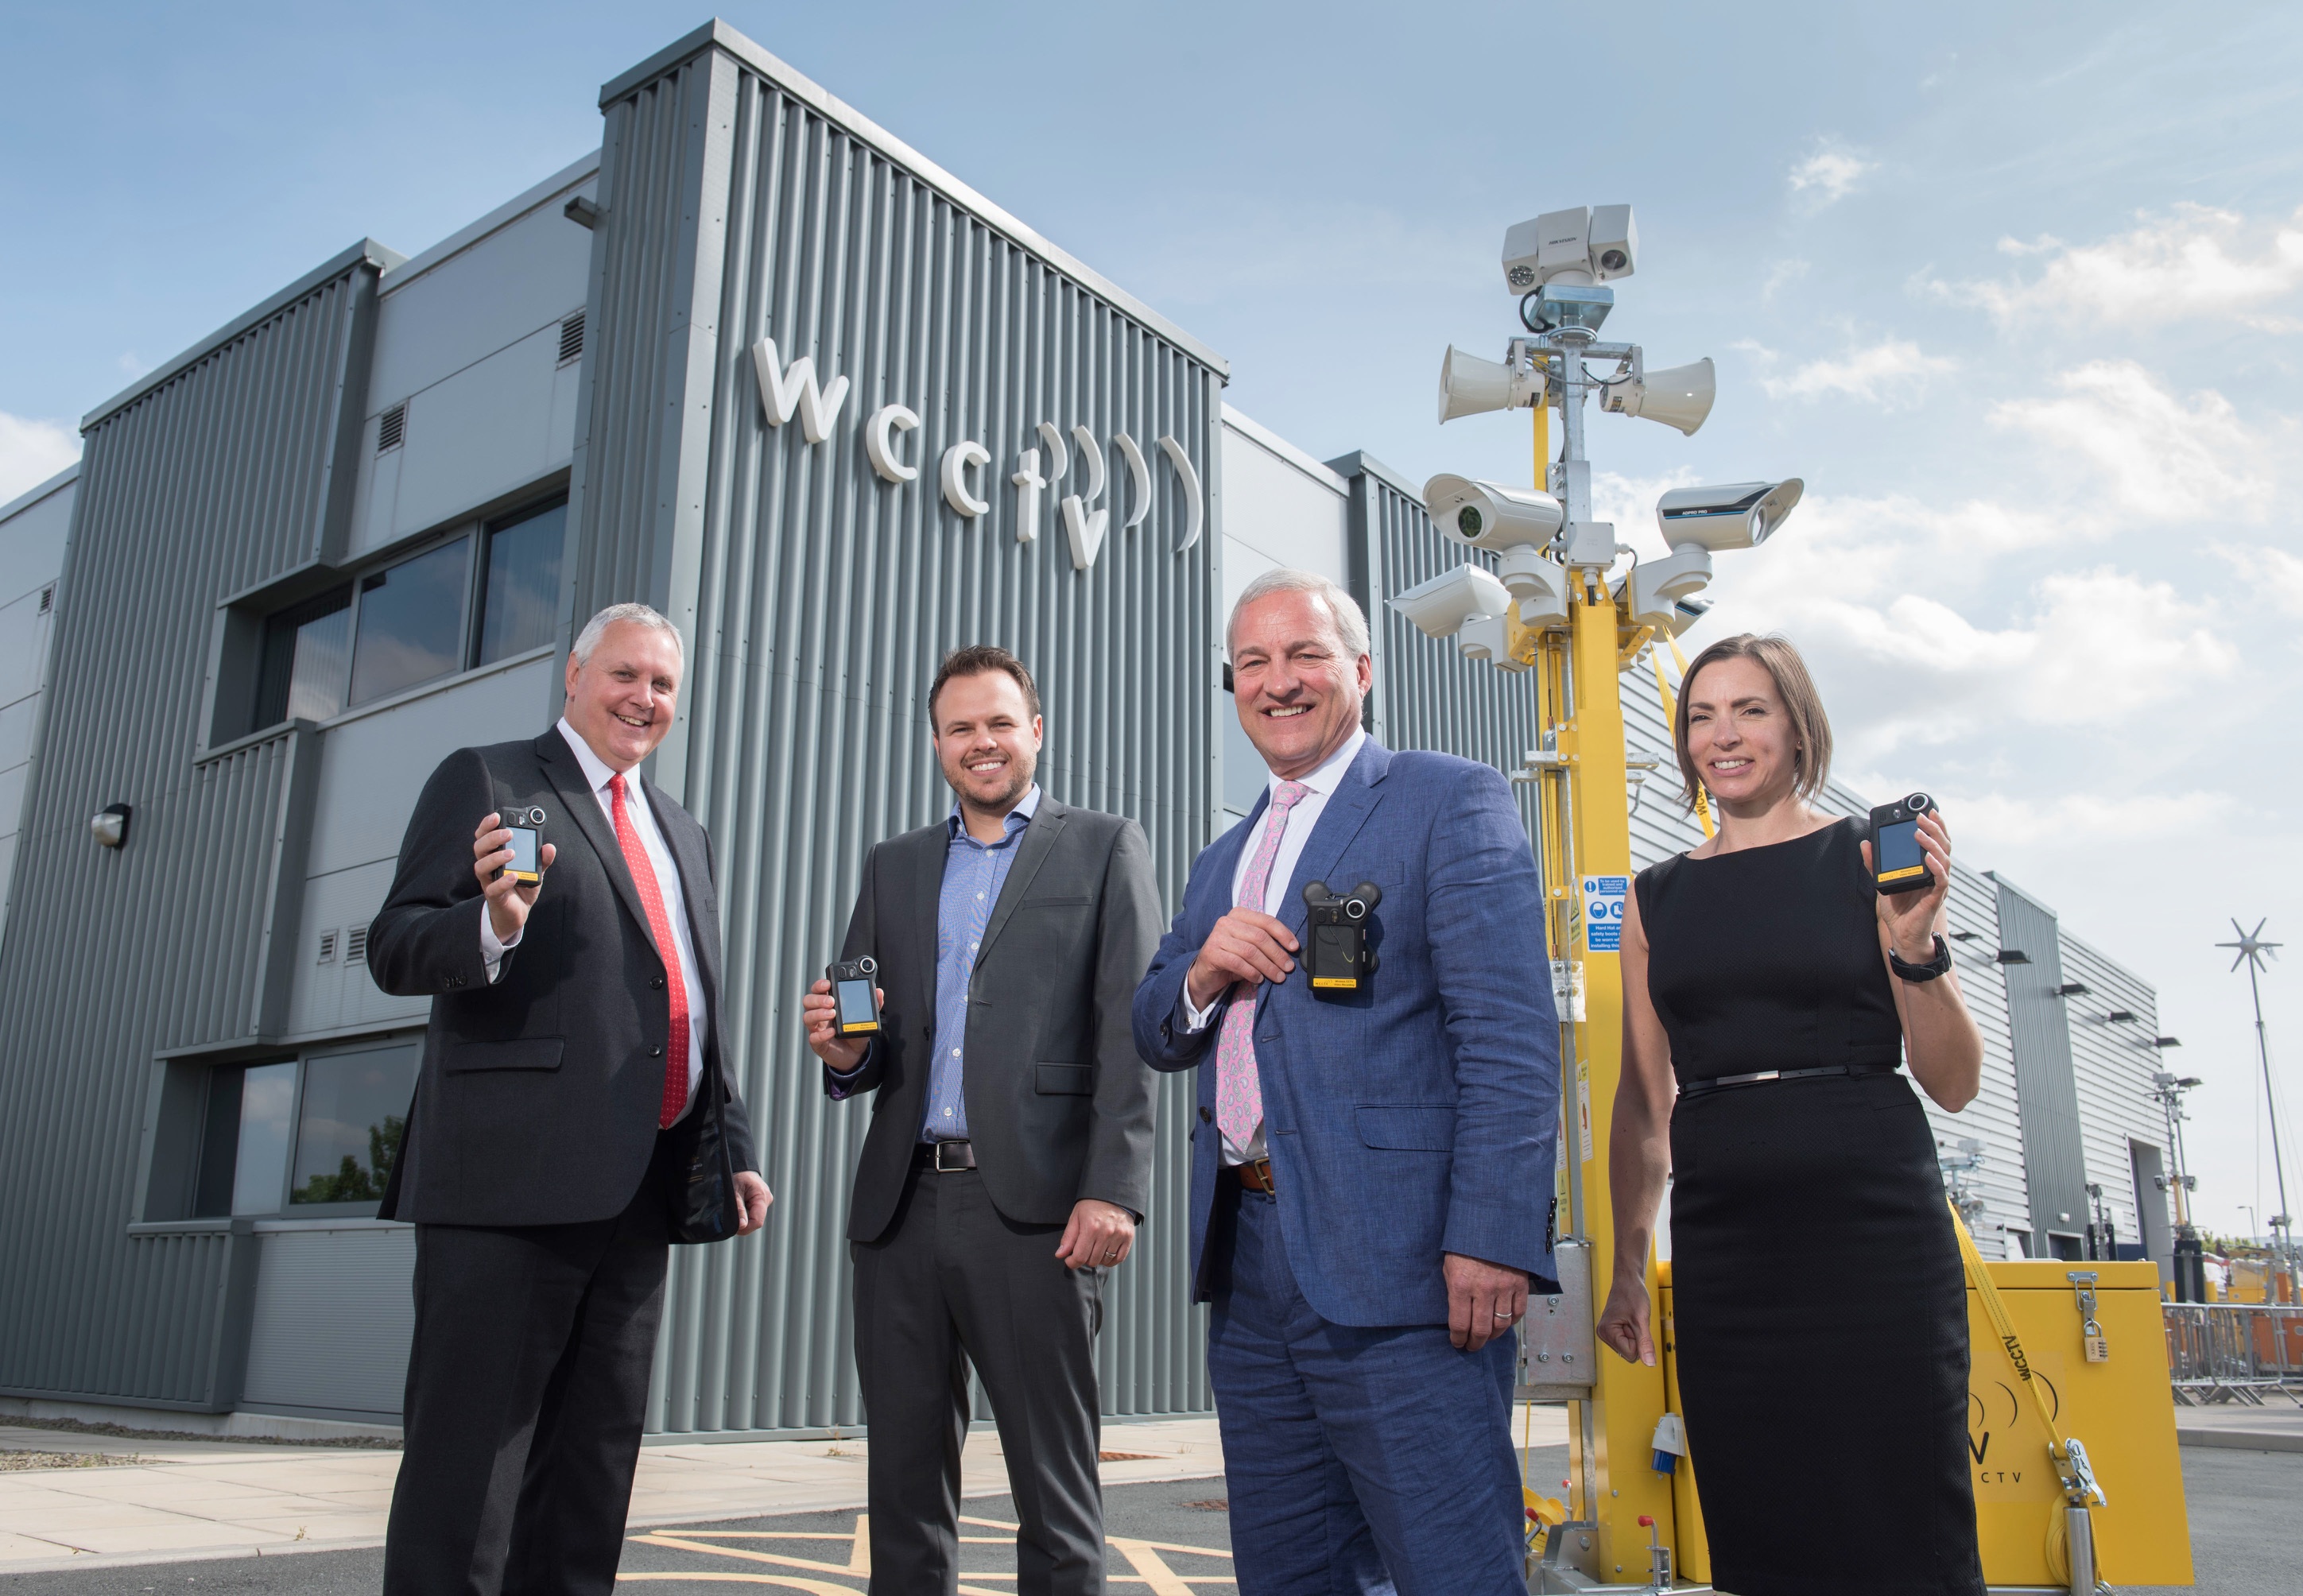 WCCTV Sets Sights On Growth With HSBC Funding